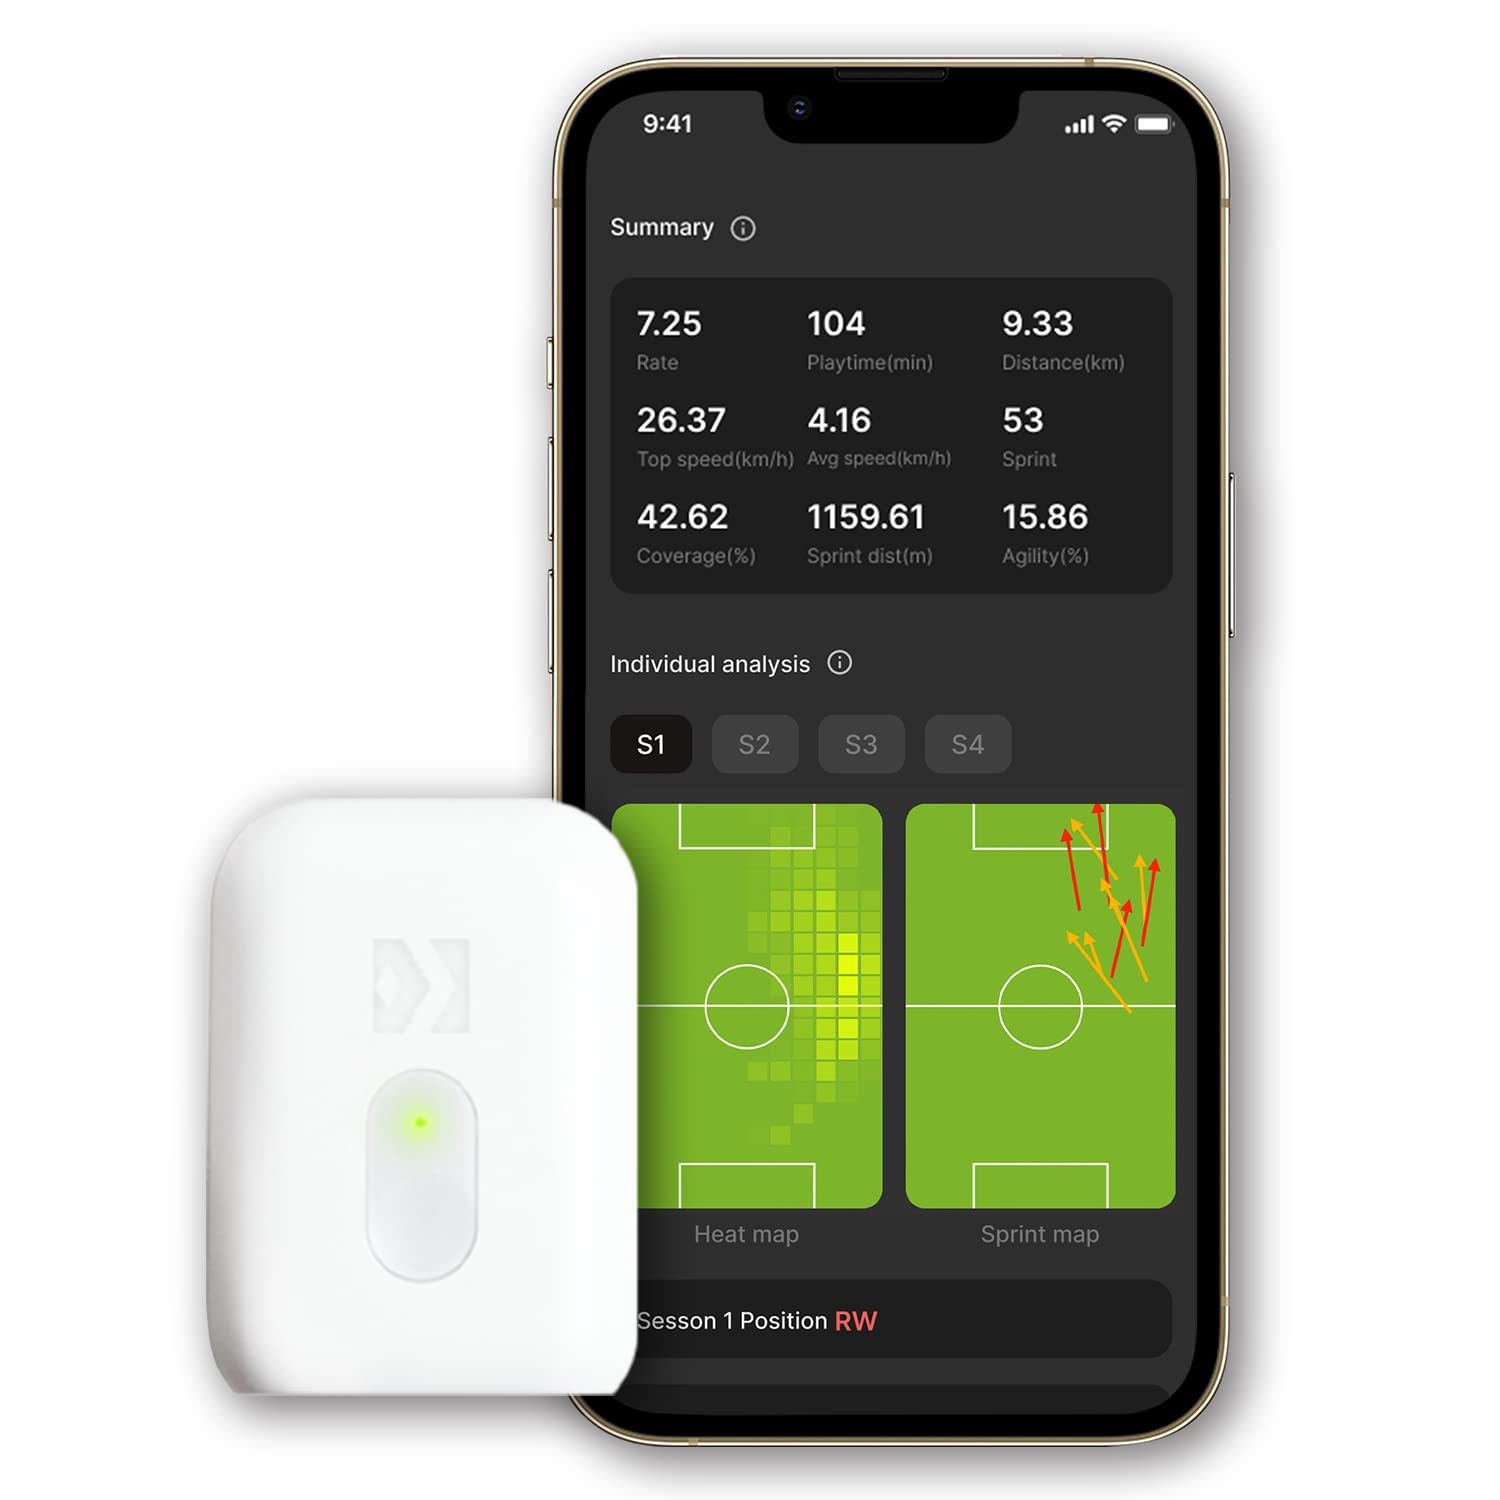 SOCCERBEE LITE GPS Wearable Tracker and Vest for Soccer Players (Medium)